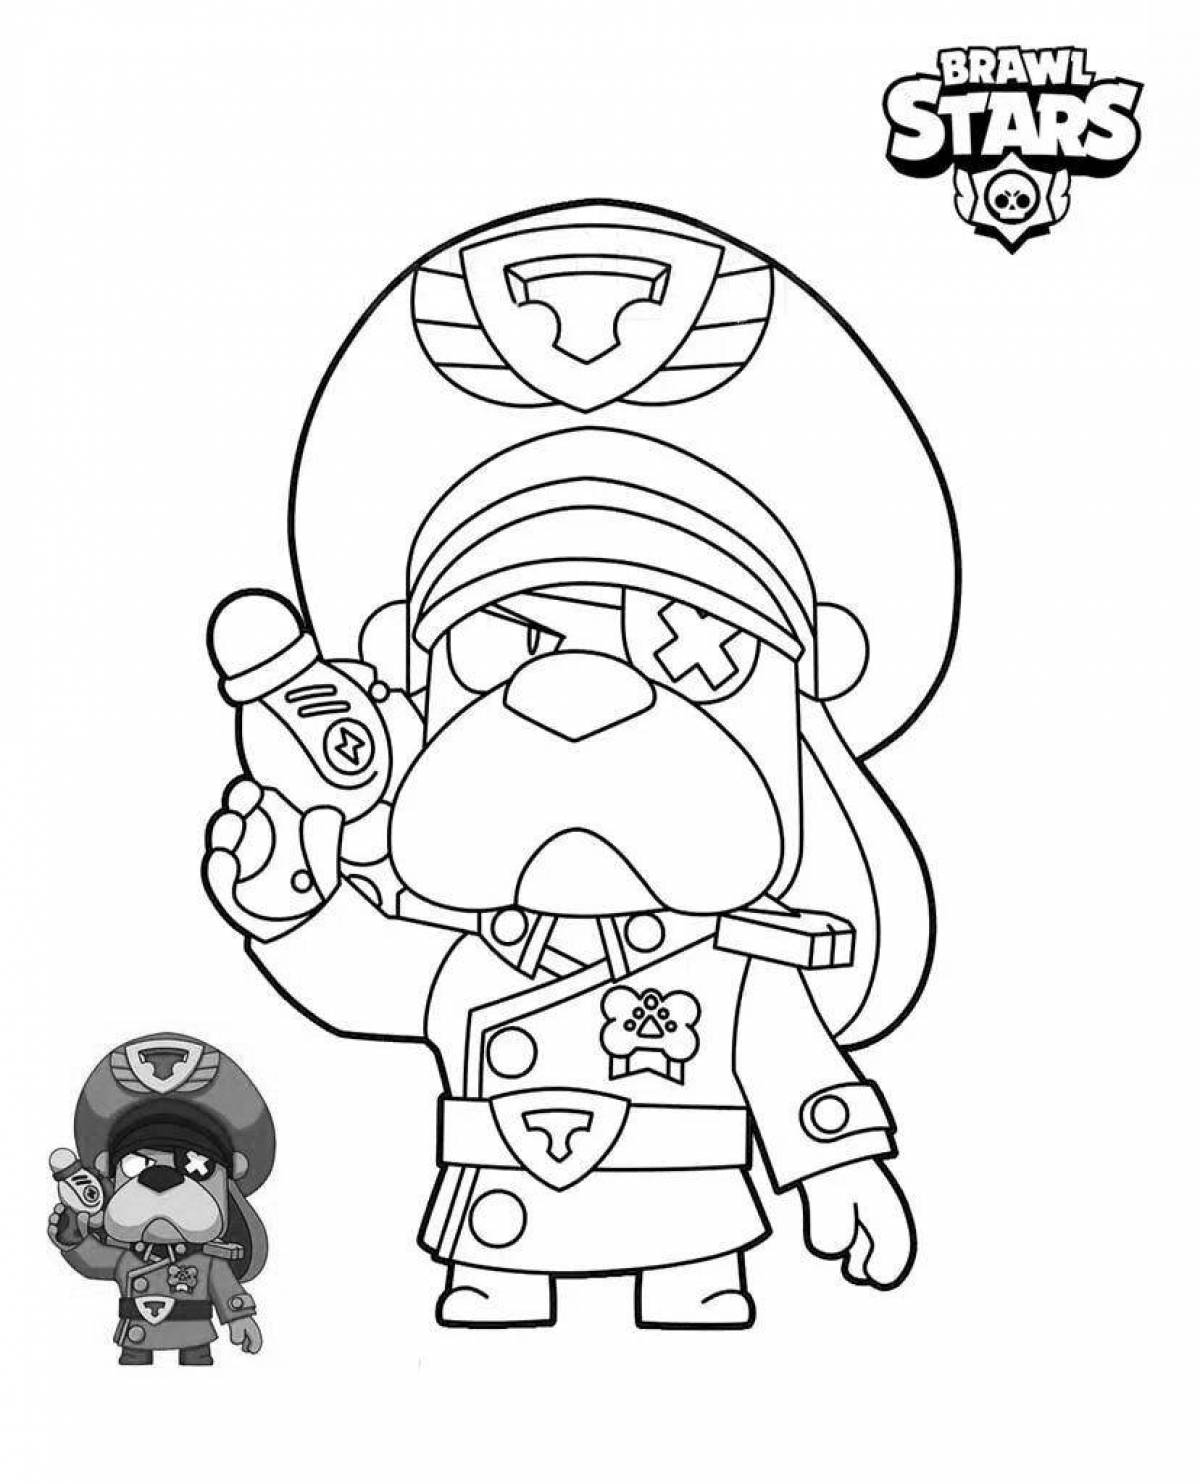 Animated sam from brawl stars coloring book